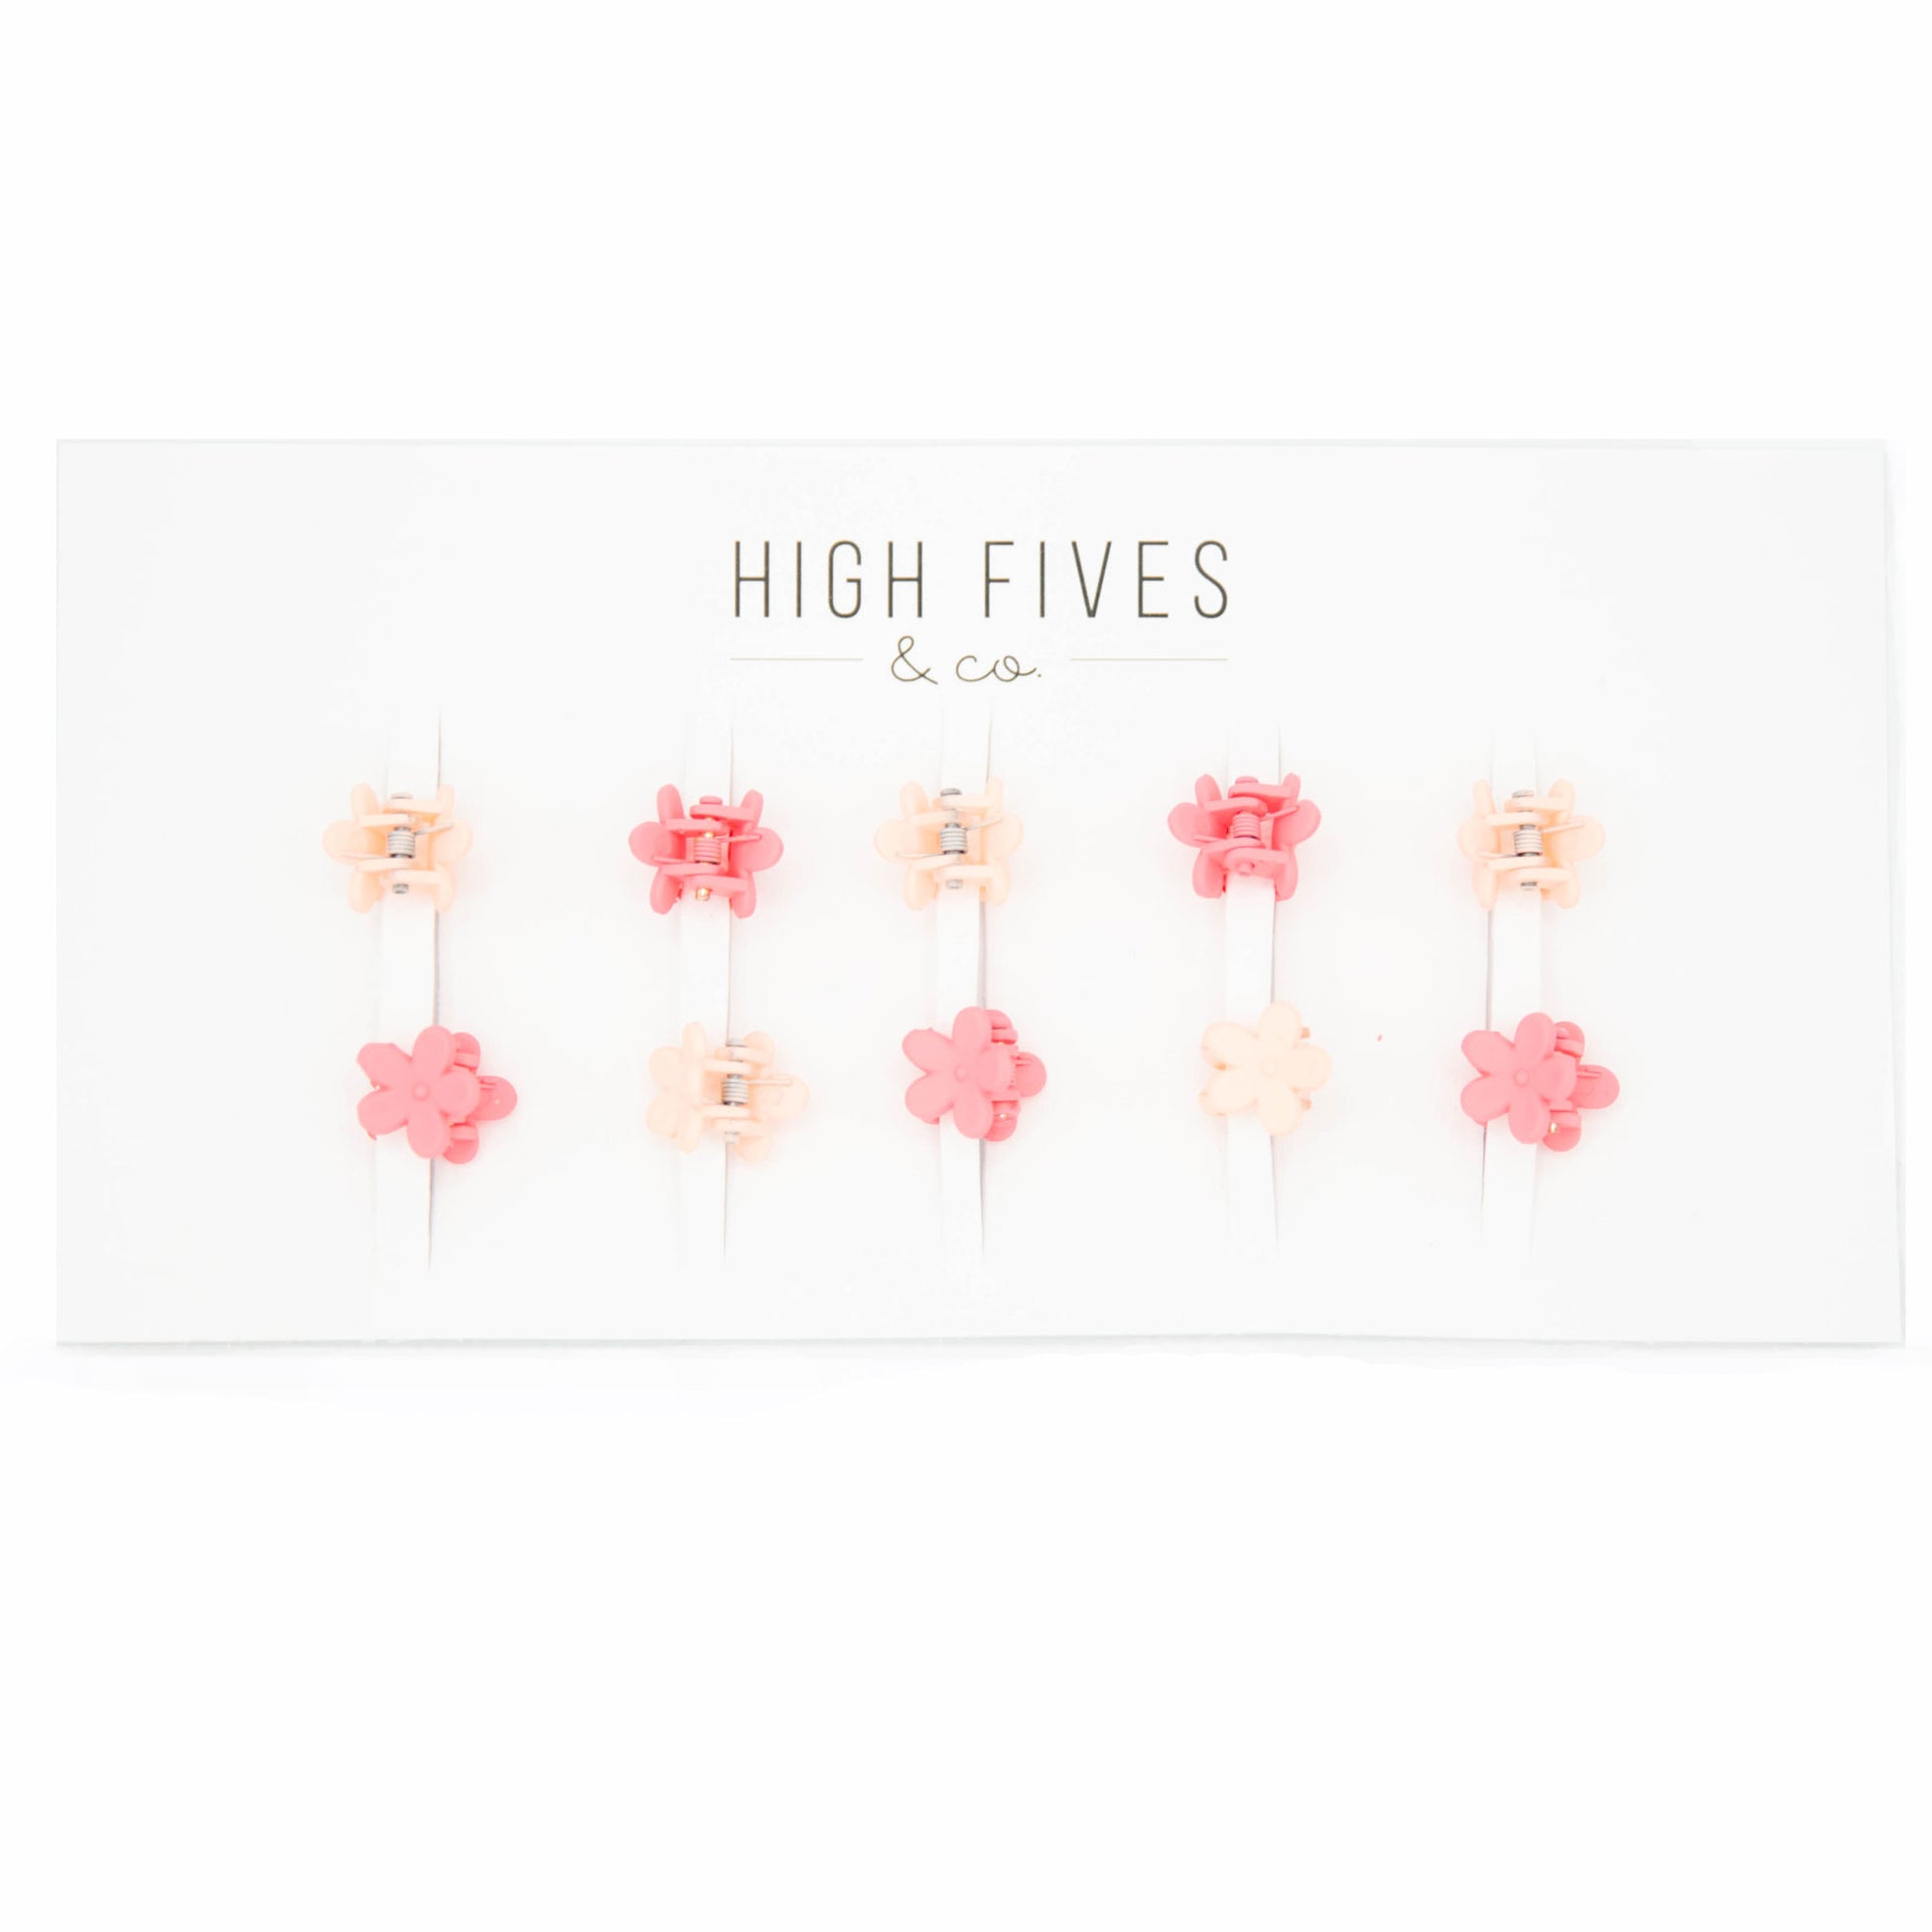 High Fives Mini Flower Hair Claw Clips 1.4cm - Set of 10 - Matte Pink Tones